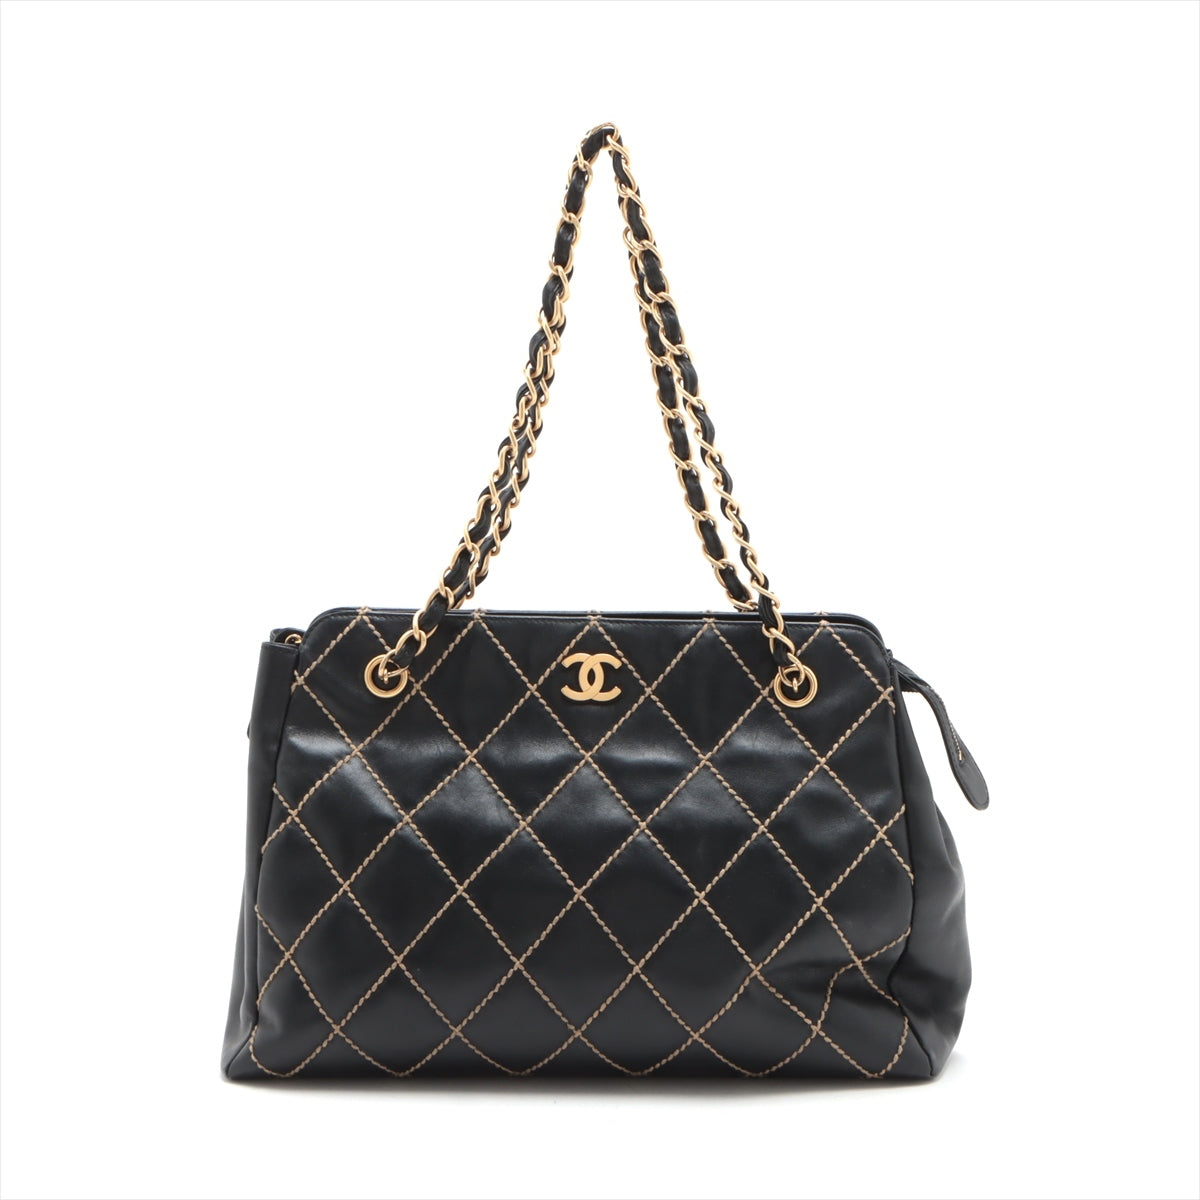 Chanel Wild Stitch Leather Chain tote bag Black Gold Metal fittings 8XXXXXX Snap loosening